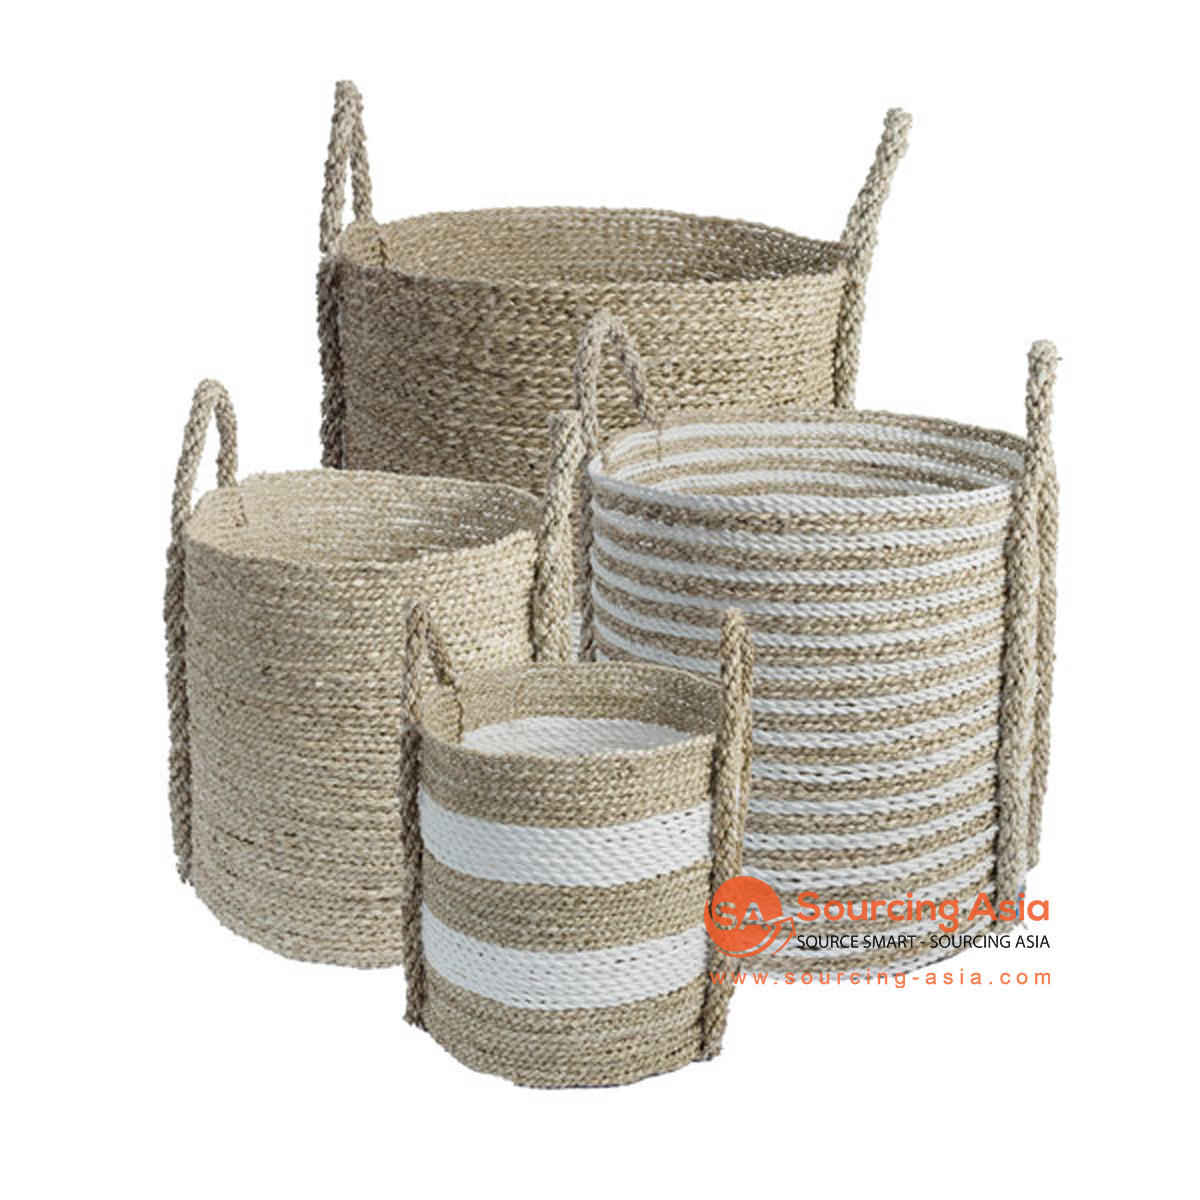 SHL168-7 SET OF FOUR NATURAL AND WHITE SEAGRASS BASKETS WITH HANDLE